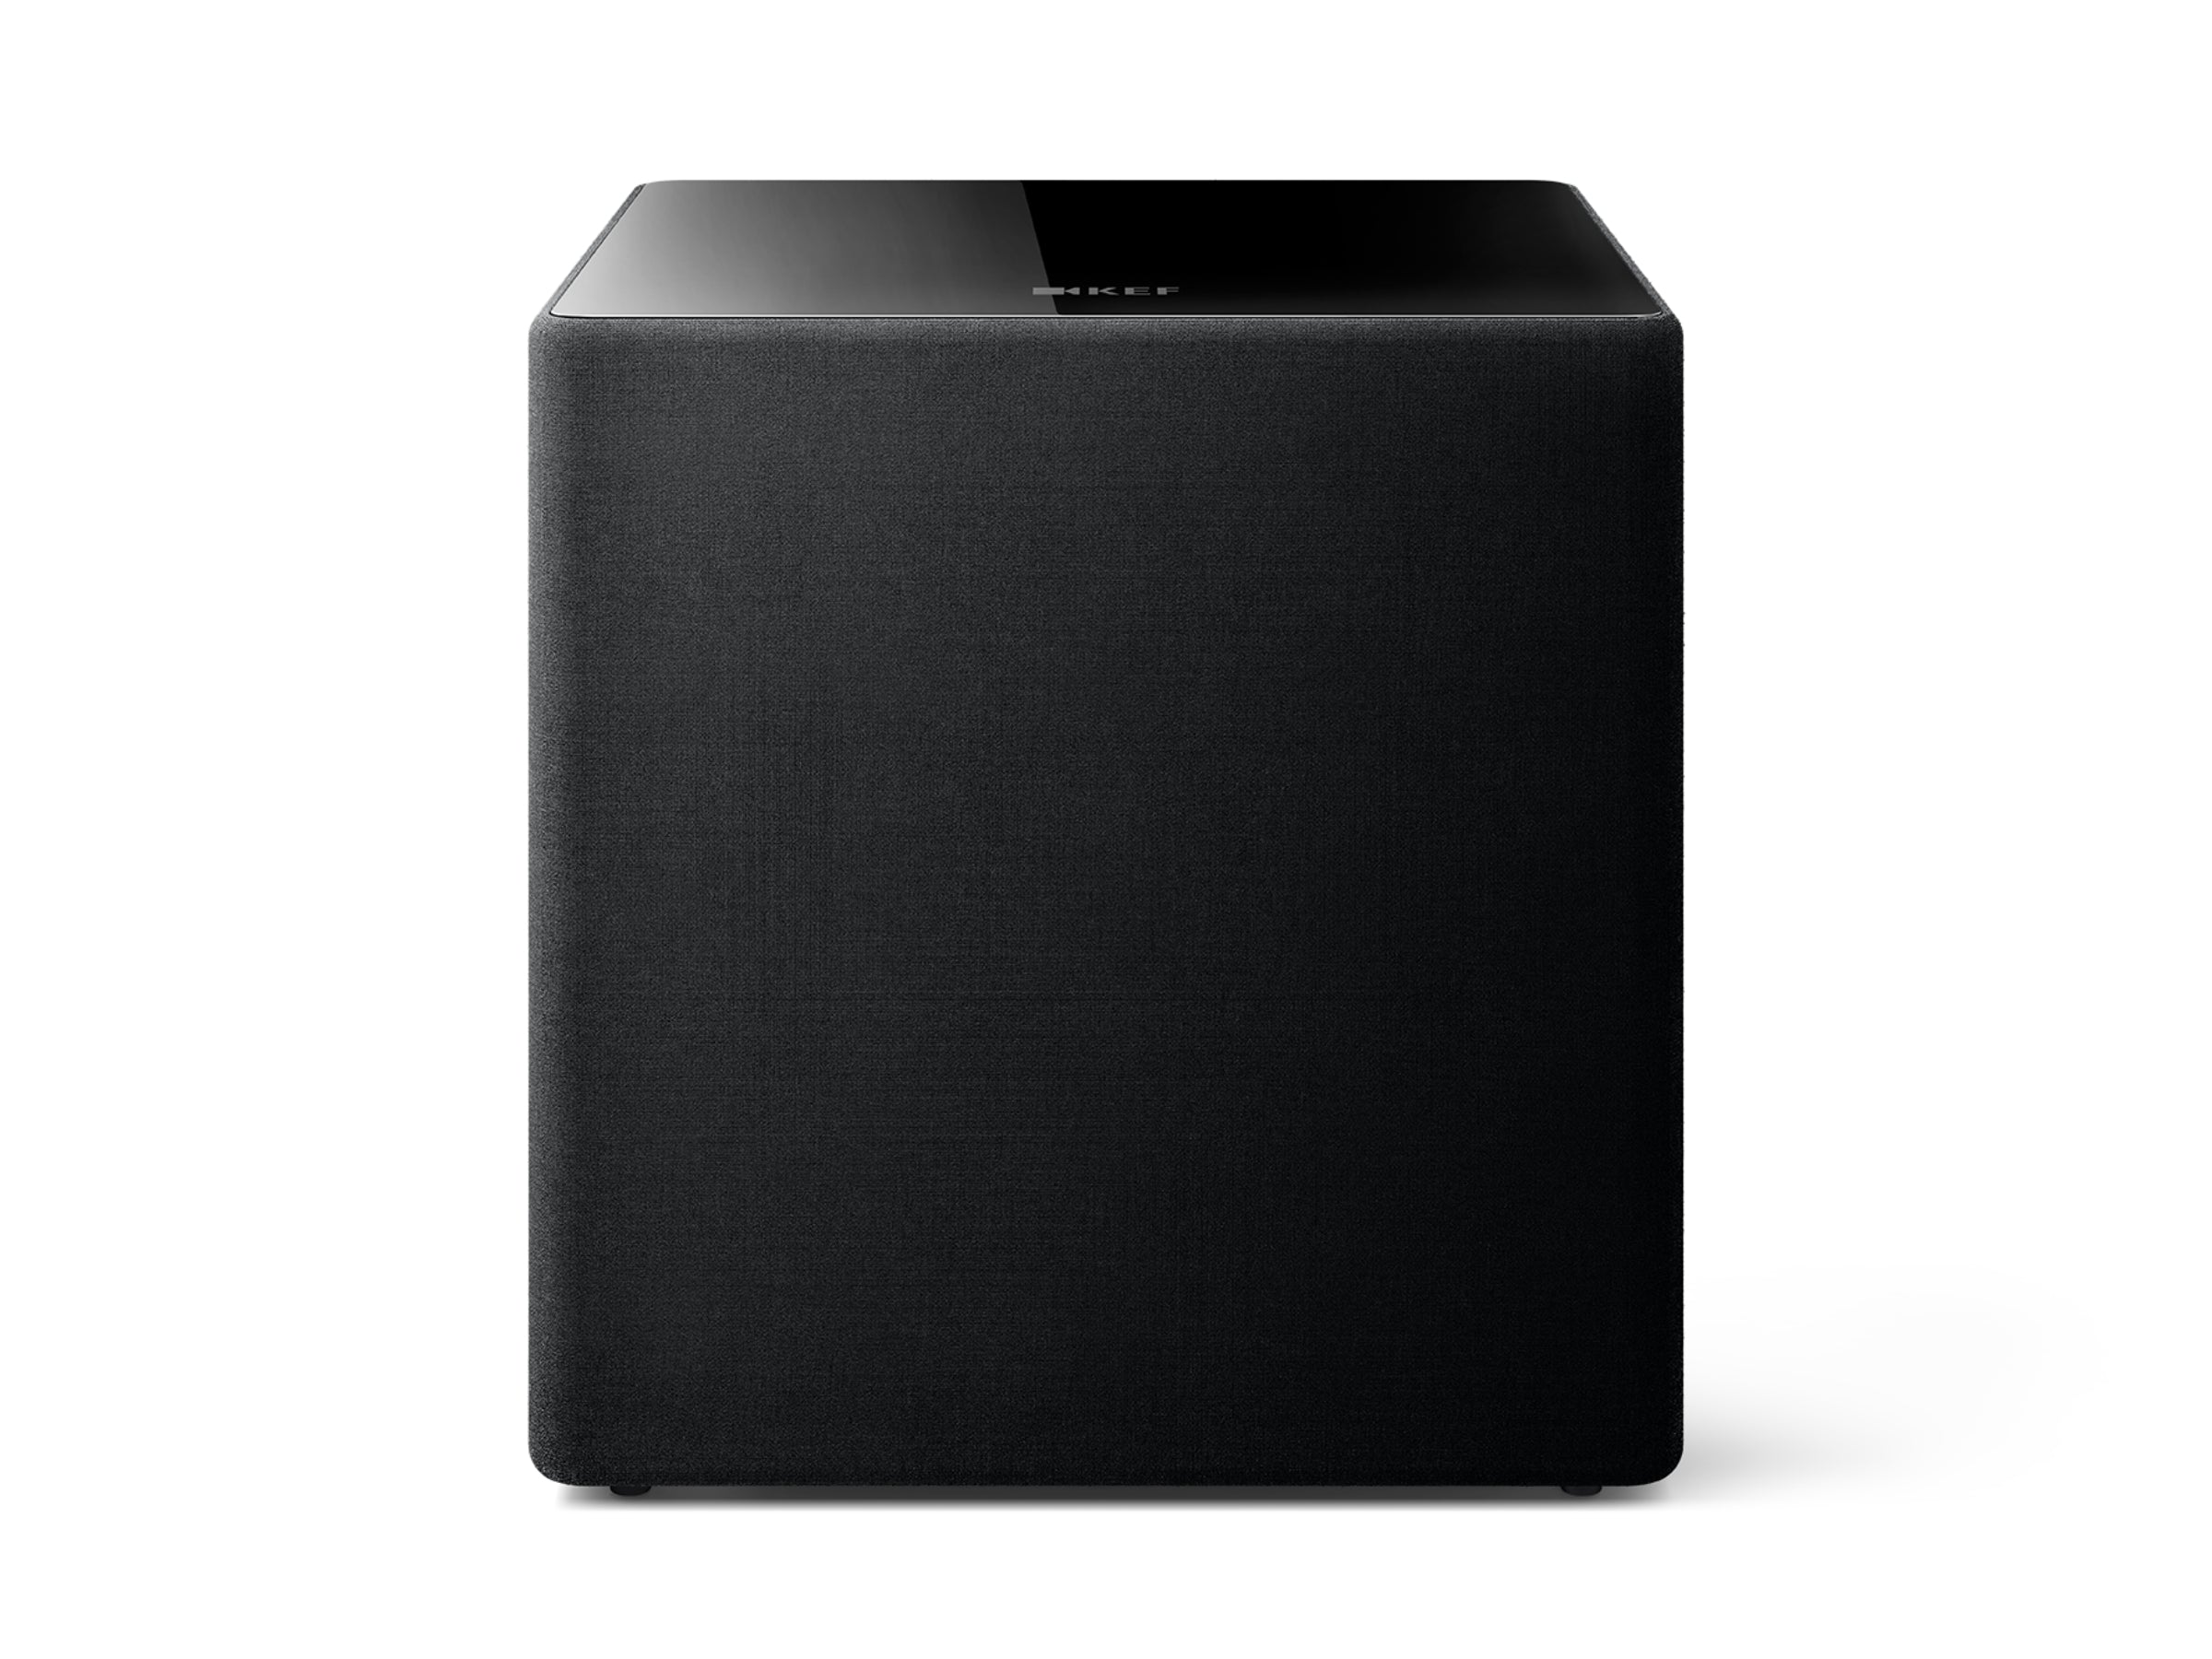 KEF Kube 15 MIE Subwoofer